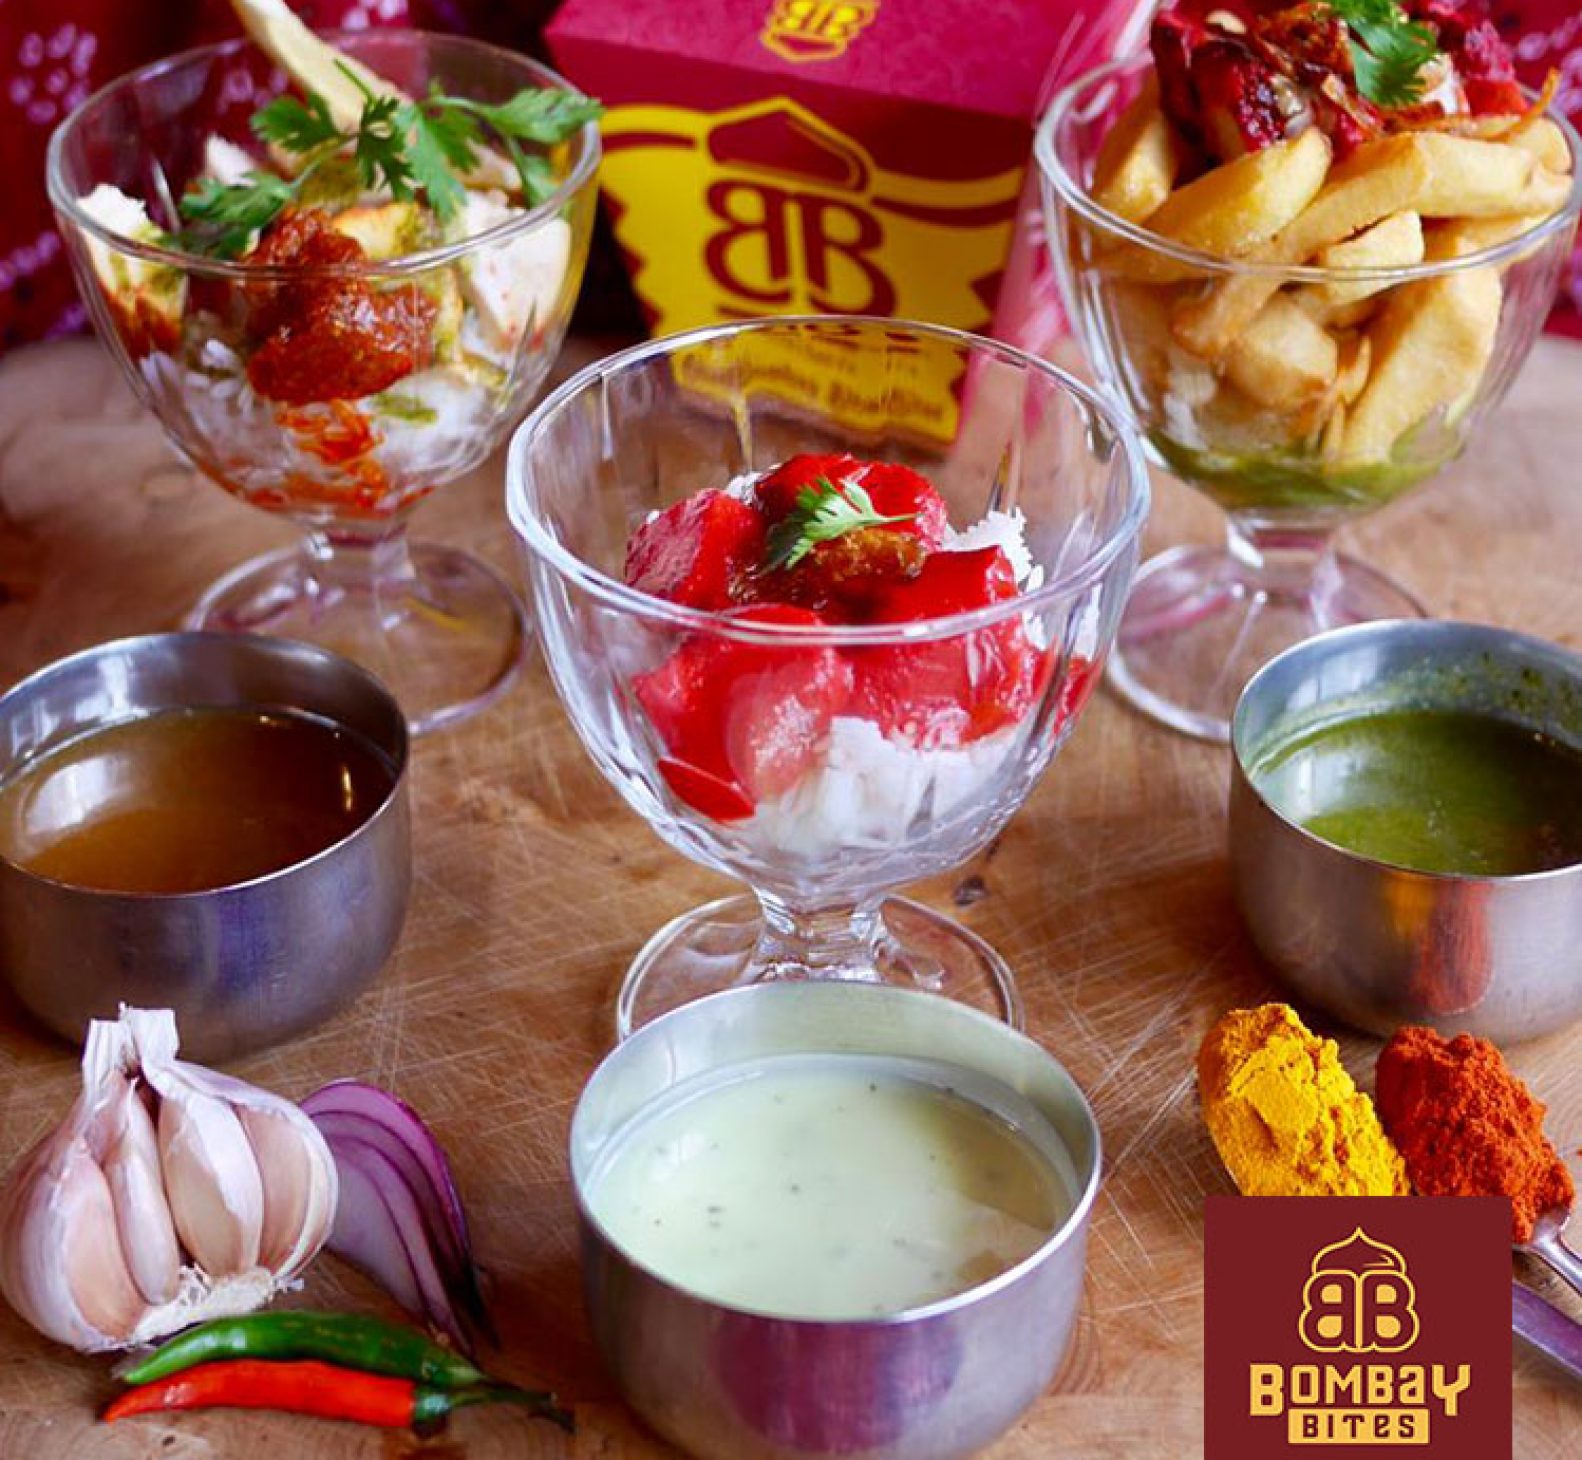 Bombay Bites Evington Road 20% off Just Eat ‘Cheeky Tuesdays’ Leicester